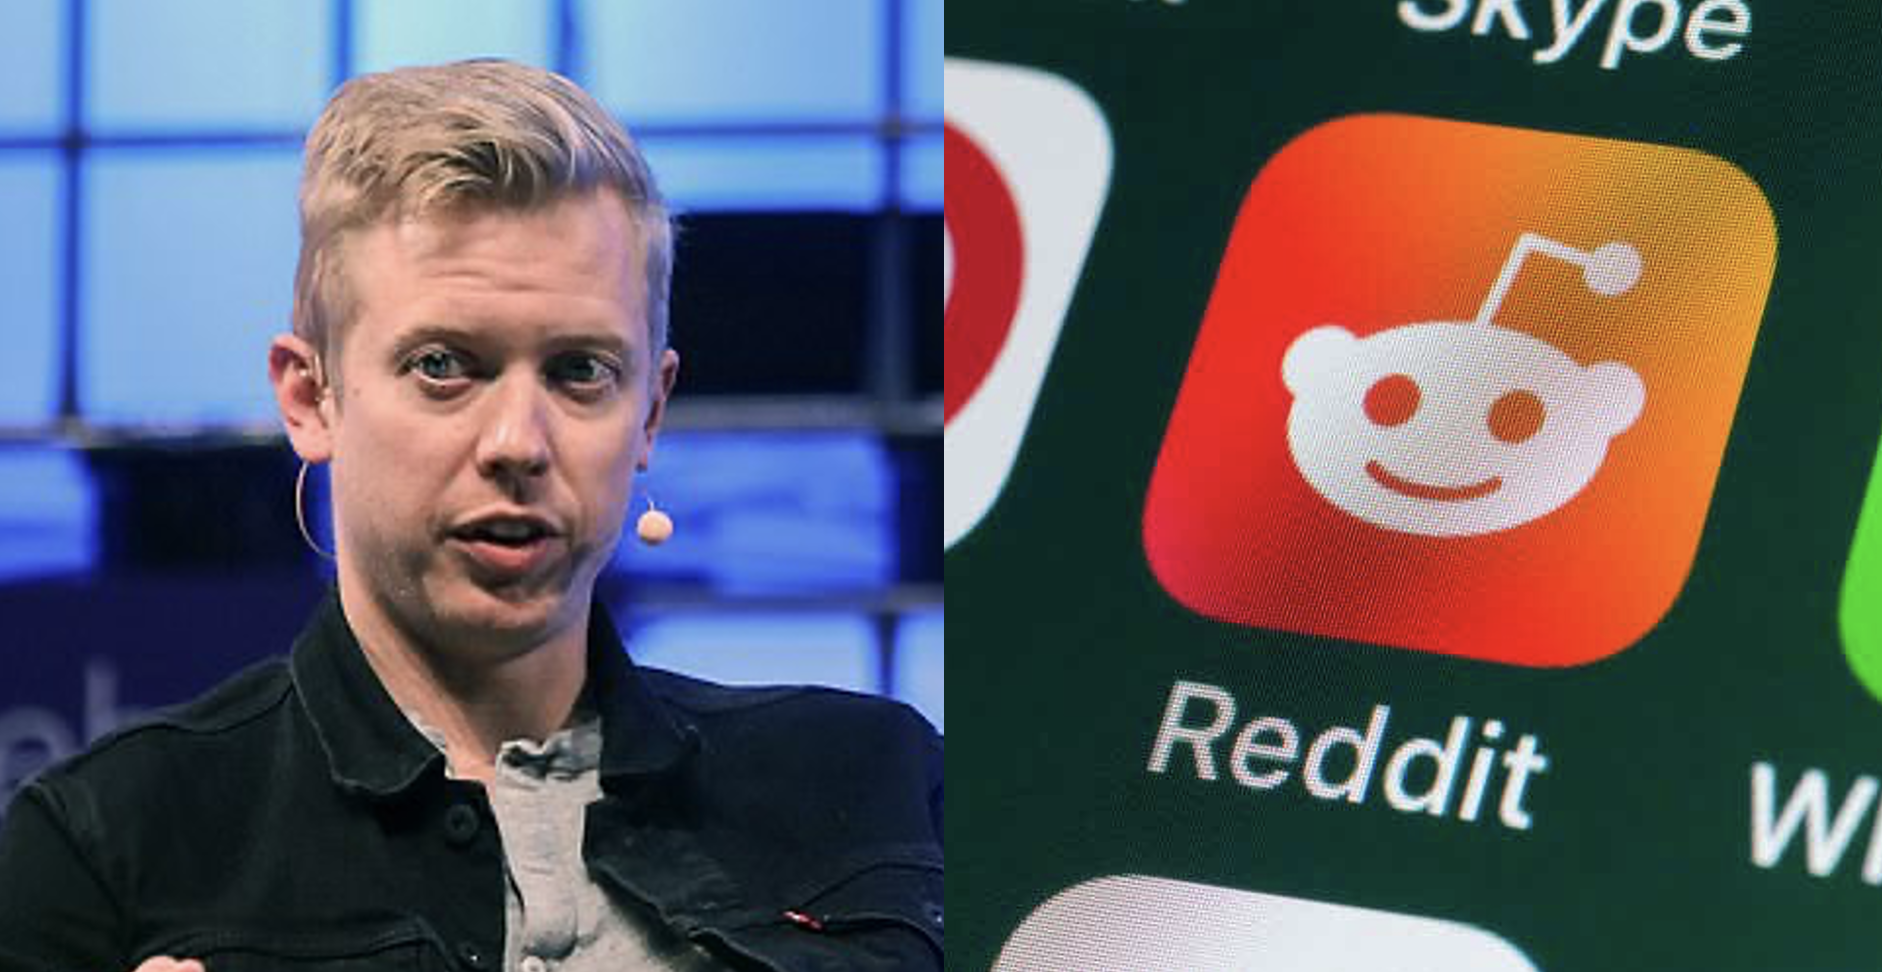 Reddit set to catch up to tech giants